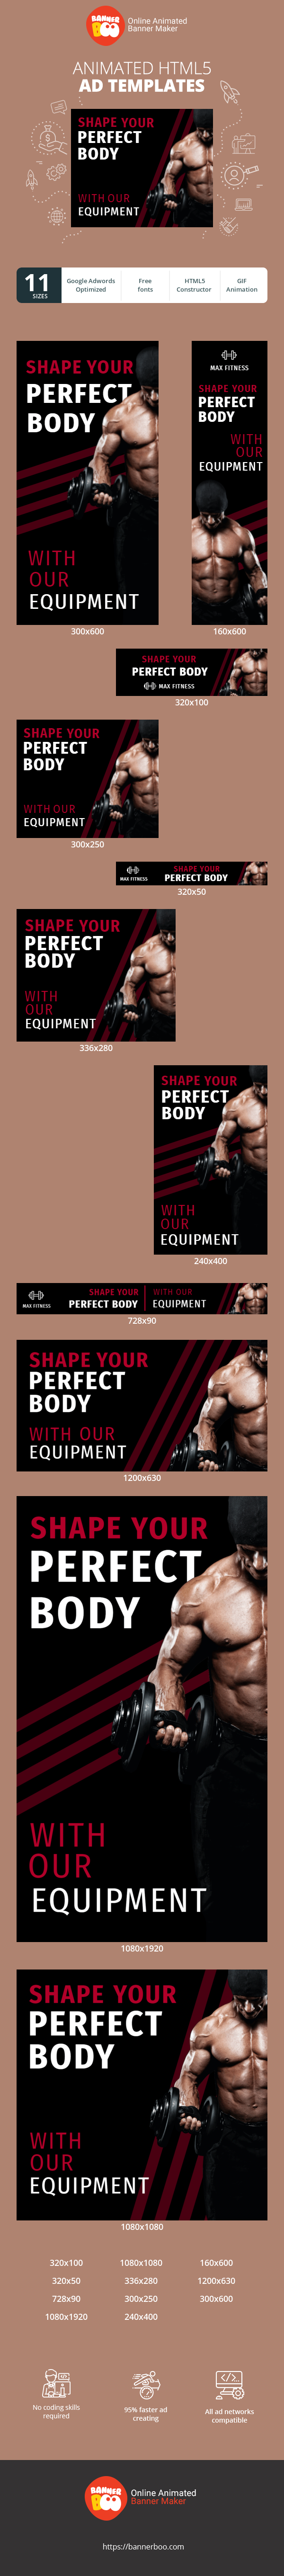 Banner ad template — Shape Your Perfect Body With Our Equipment — First Workout For Free